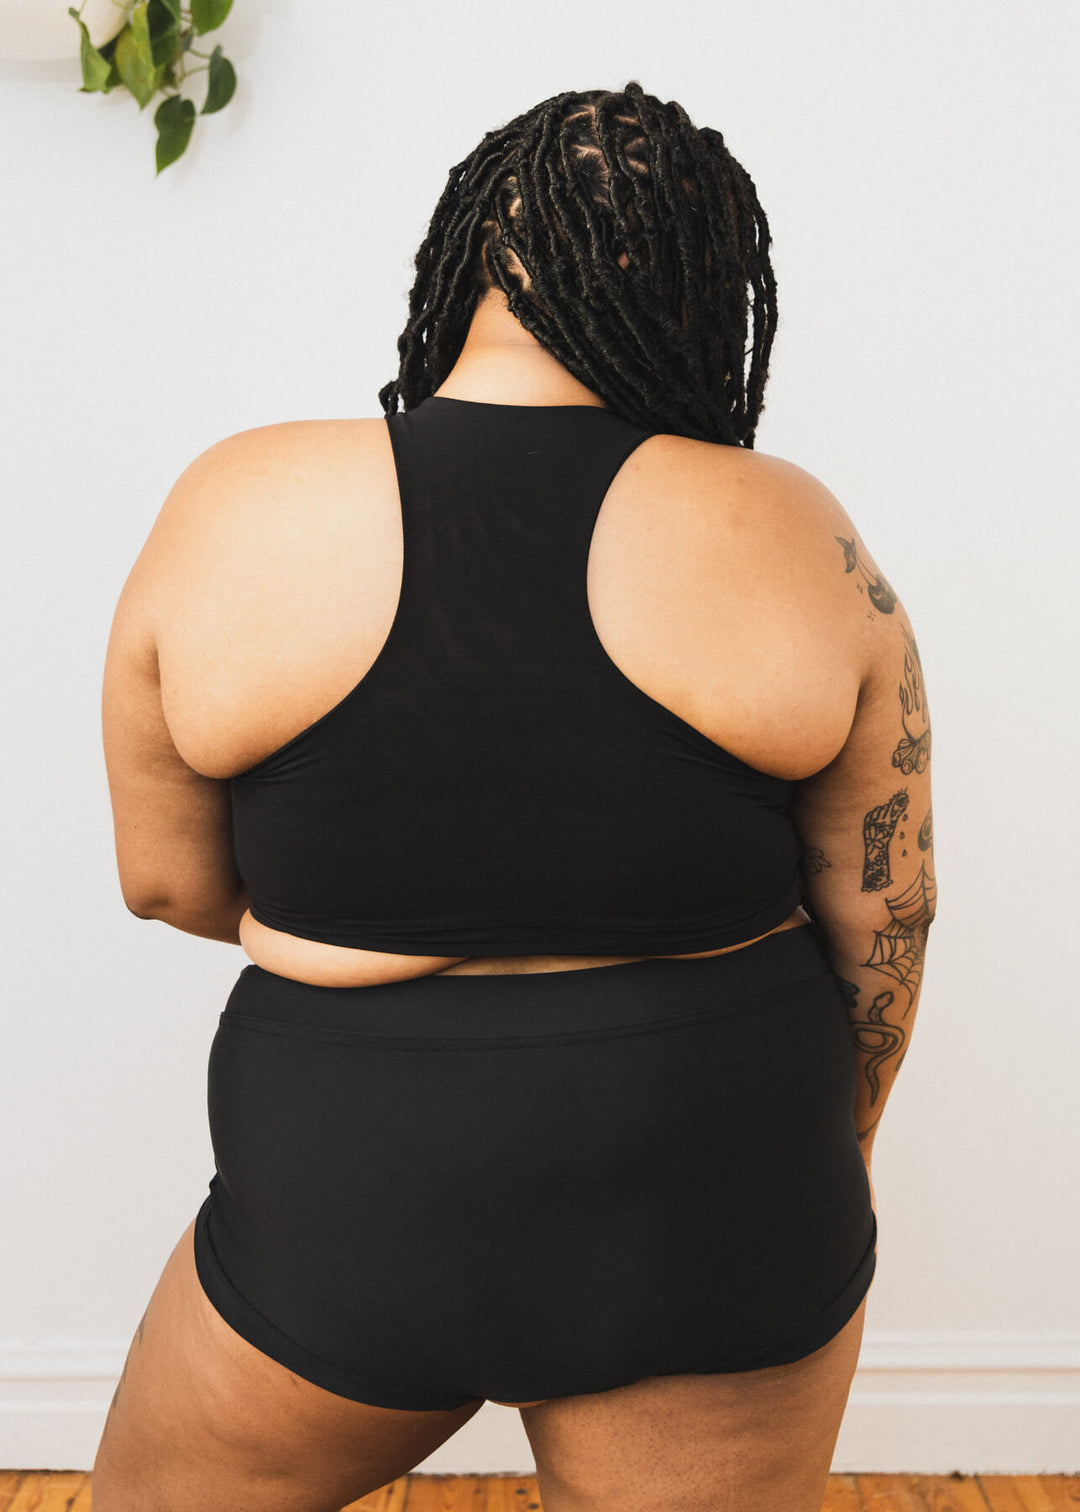 Plus-sized person wearing a black racerback soft chest binder made from lycra, photographed from the back.